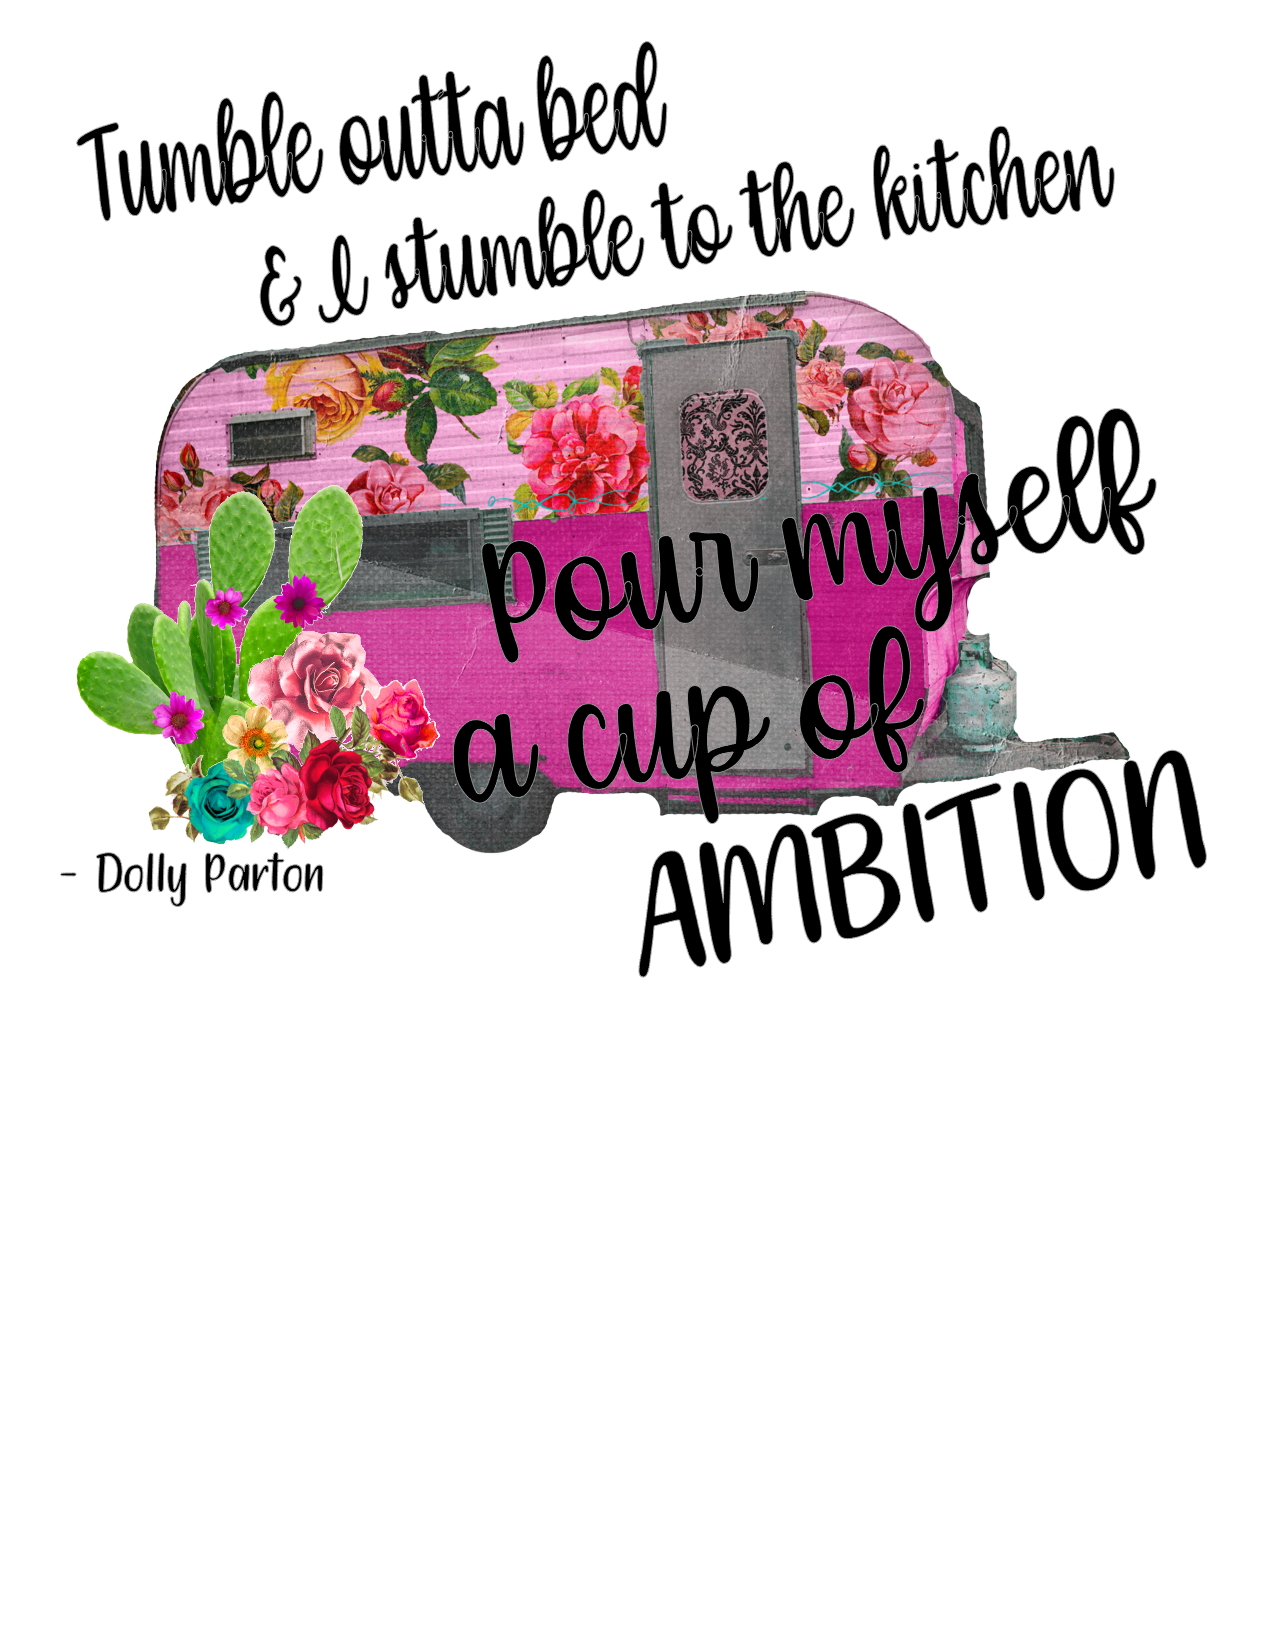 #177 Tumble Outta Bed & I stumble to the kitchen Pour myself a cup of AMBITION